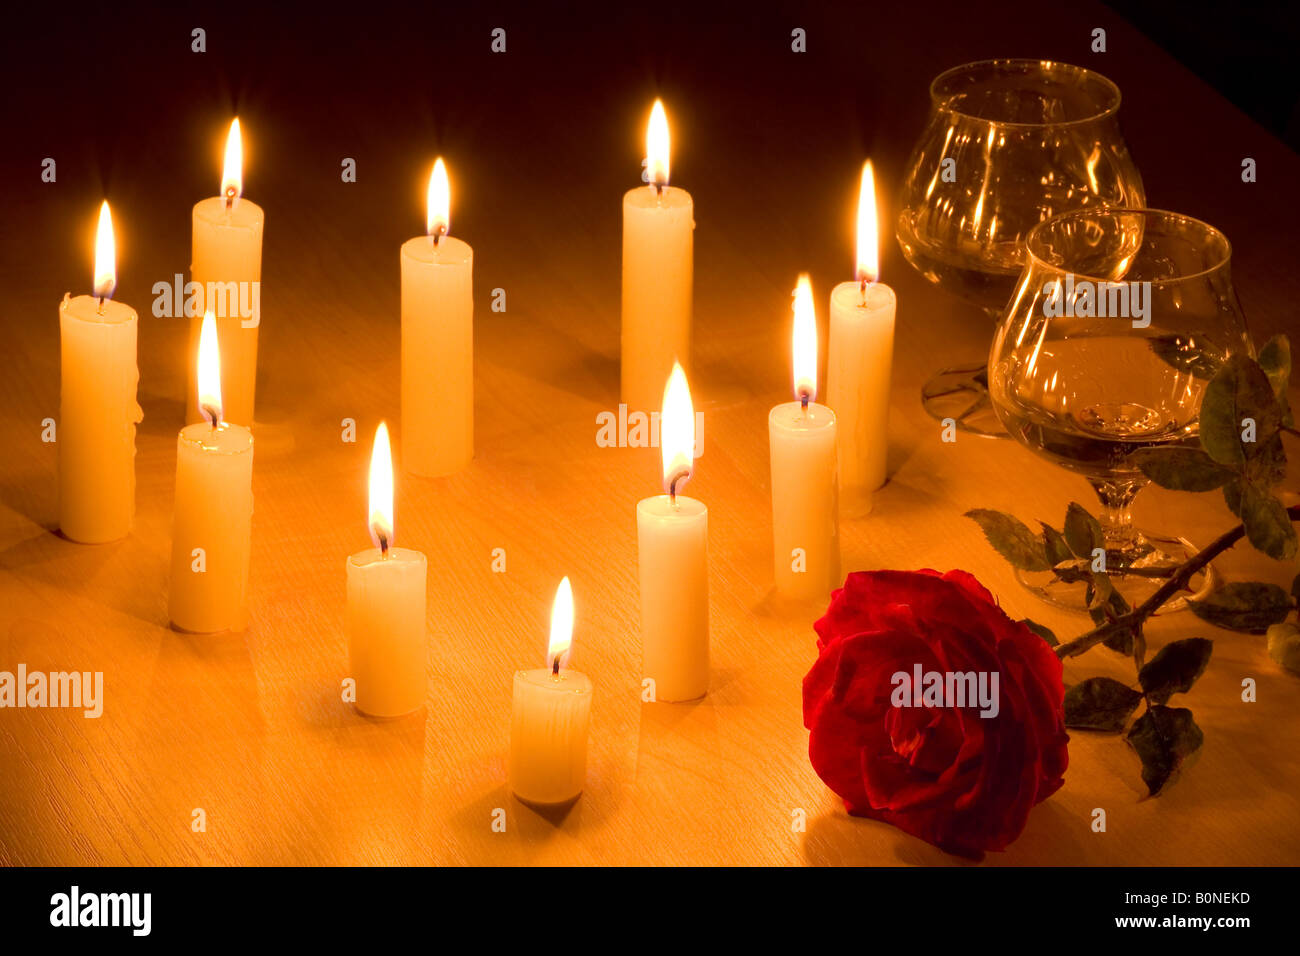 Romantic table with flaming heart of candles two glasses of wine and red rose Stock Photo